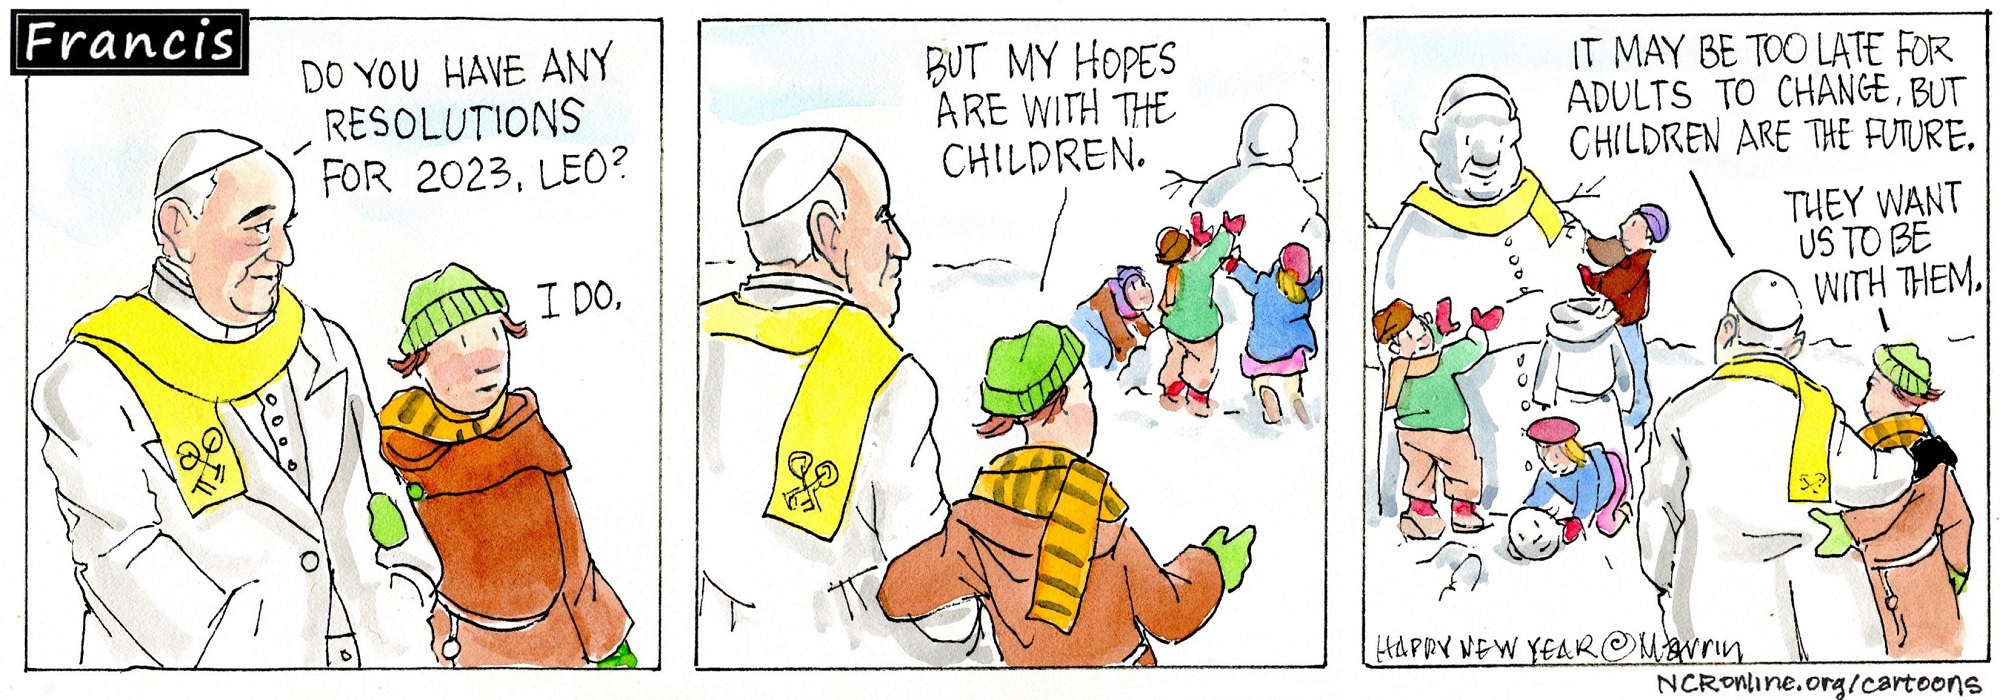 Francis, the comic strip: 2023 is here, along with resolutions and hope.